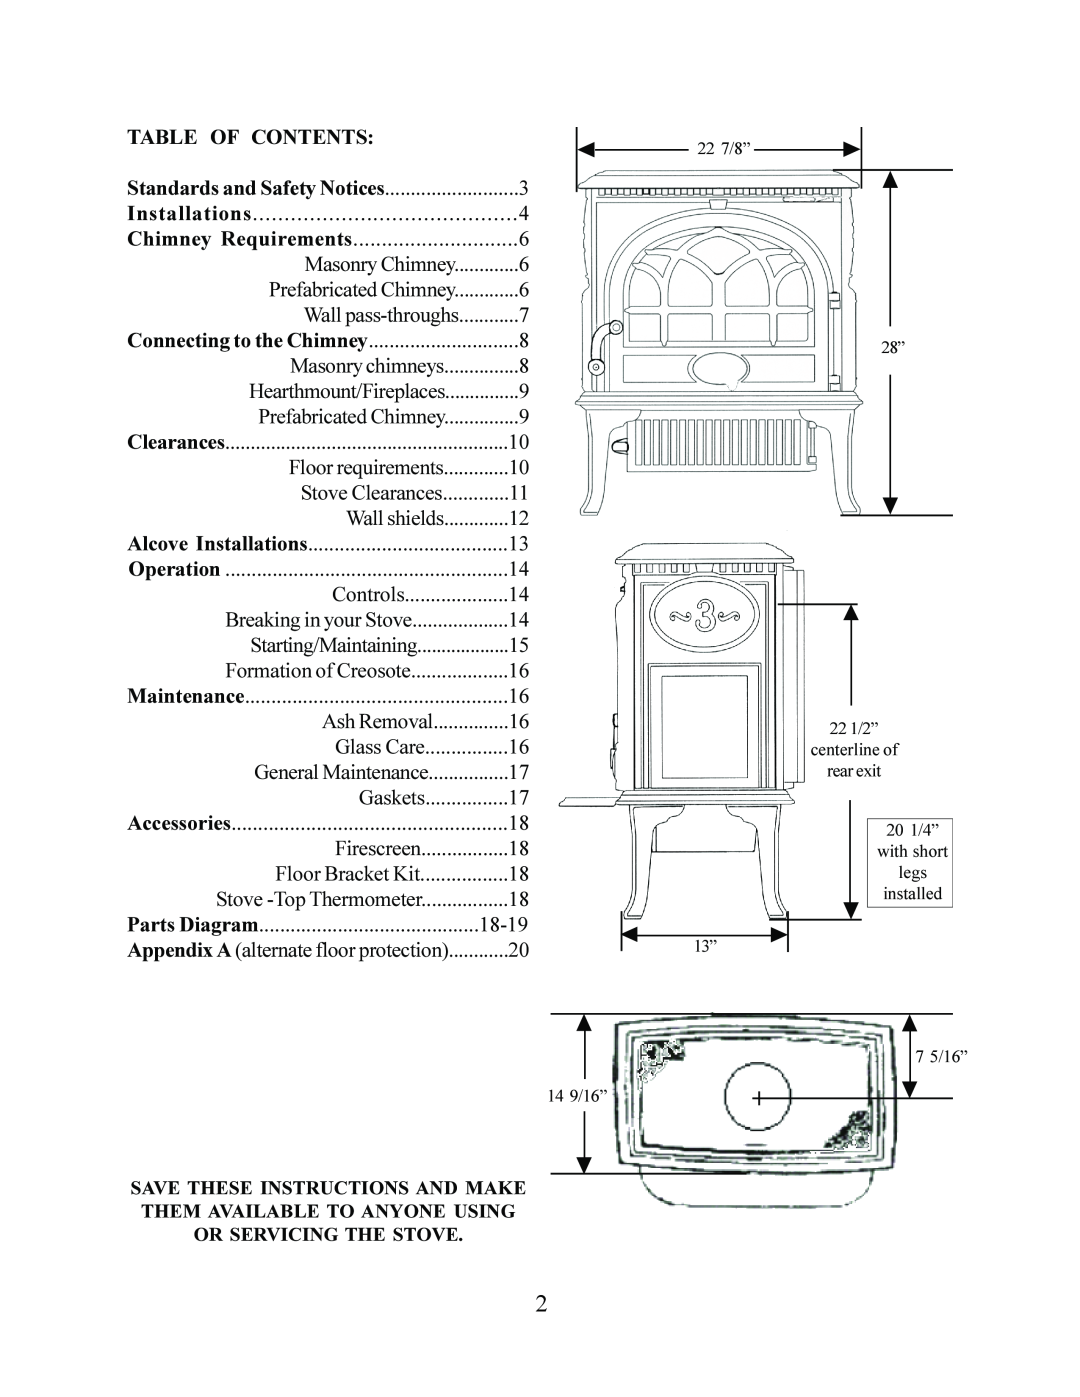 Jotul F 3 operating instructions Table Of Contents 